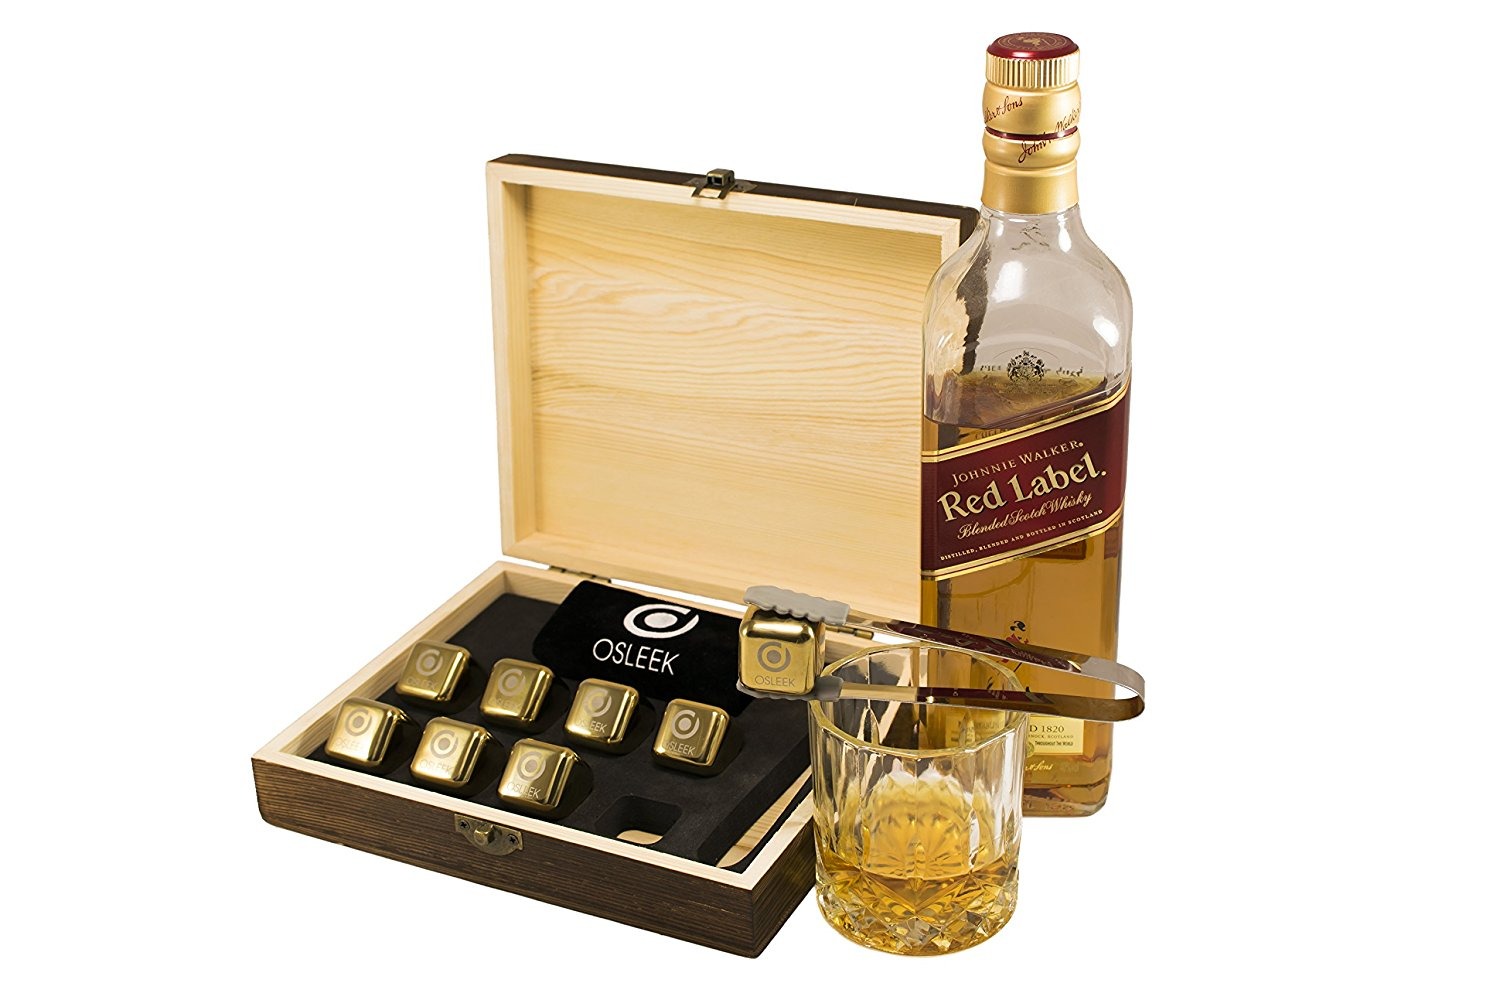 whisky-stones-stainless-steel